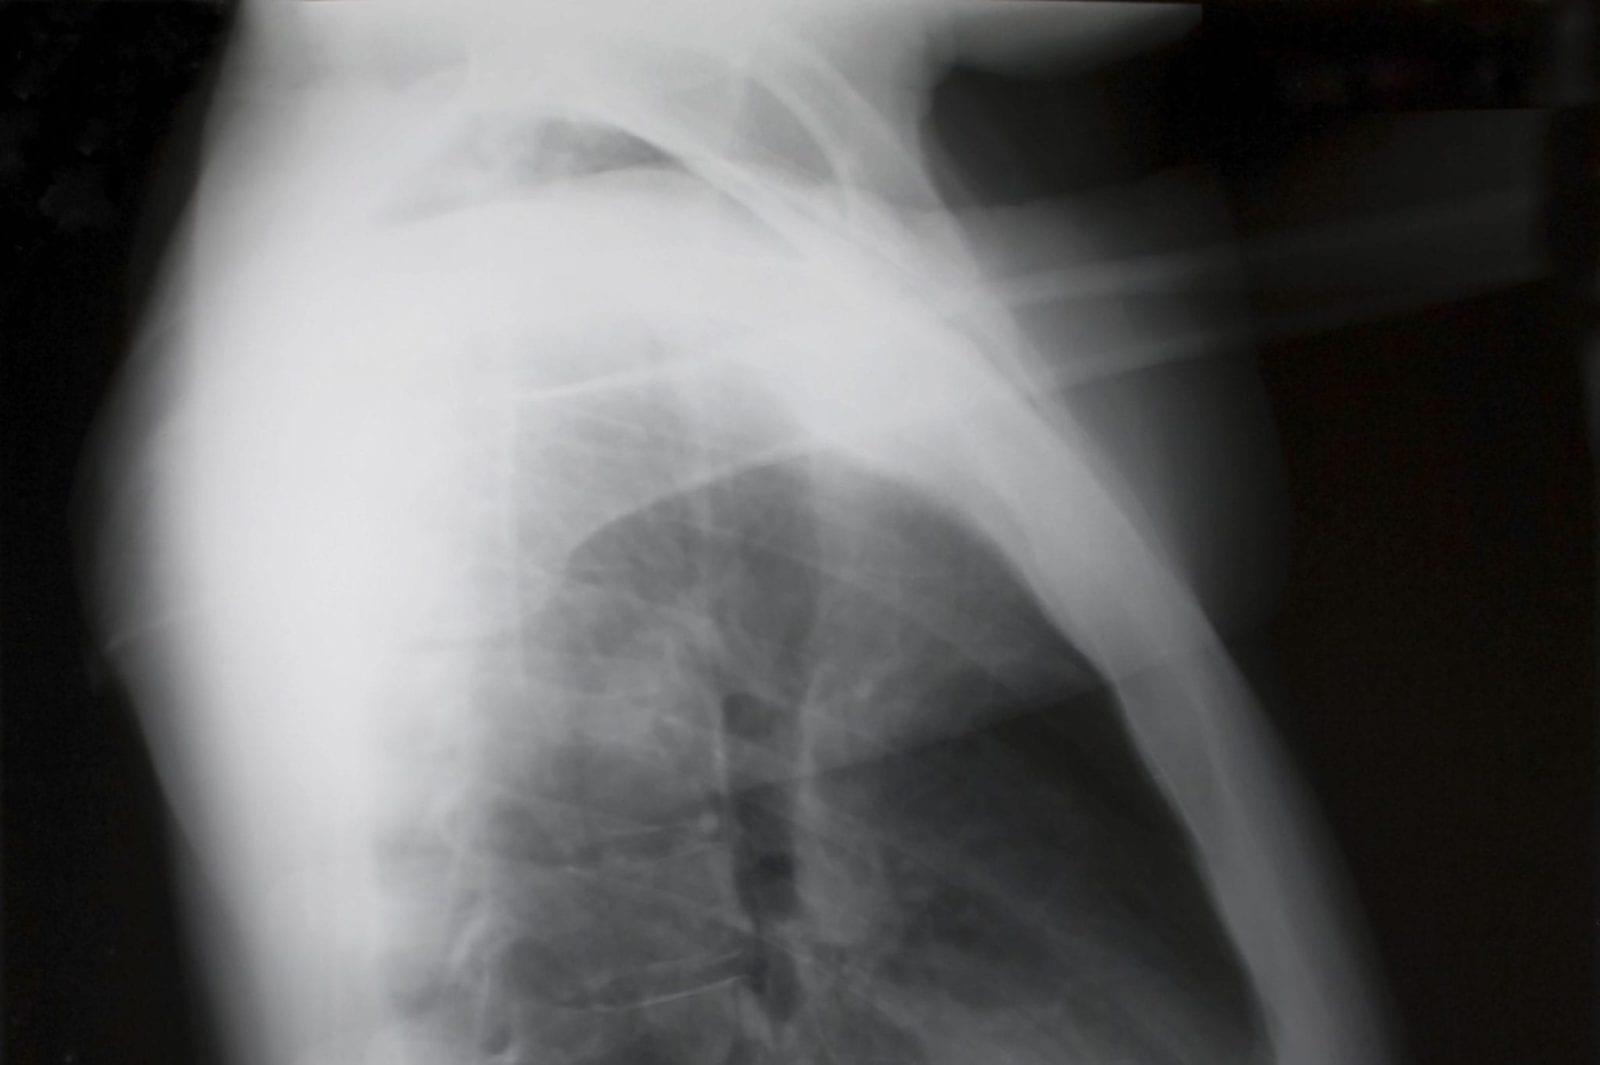 mesothelioma in the lungs - Goldwater Law Firm